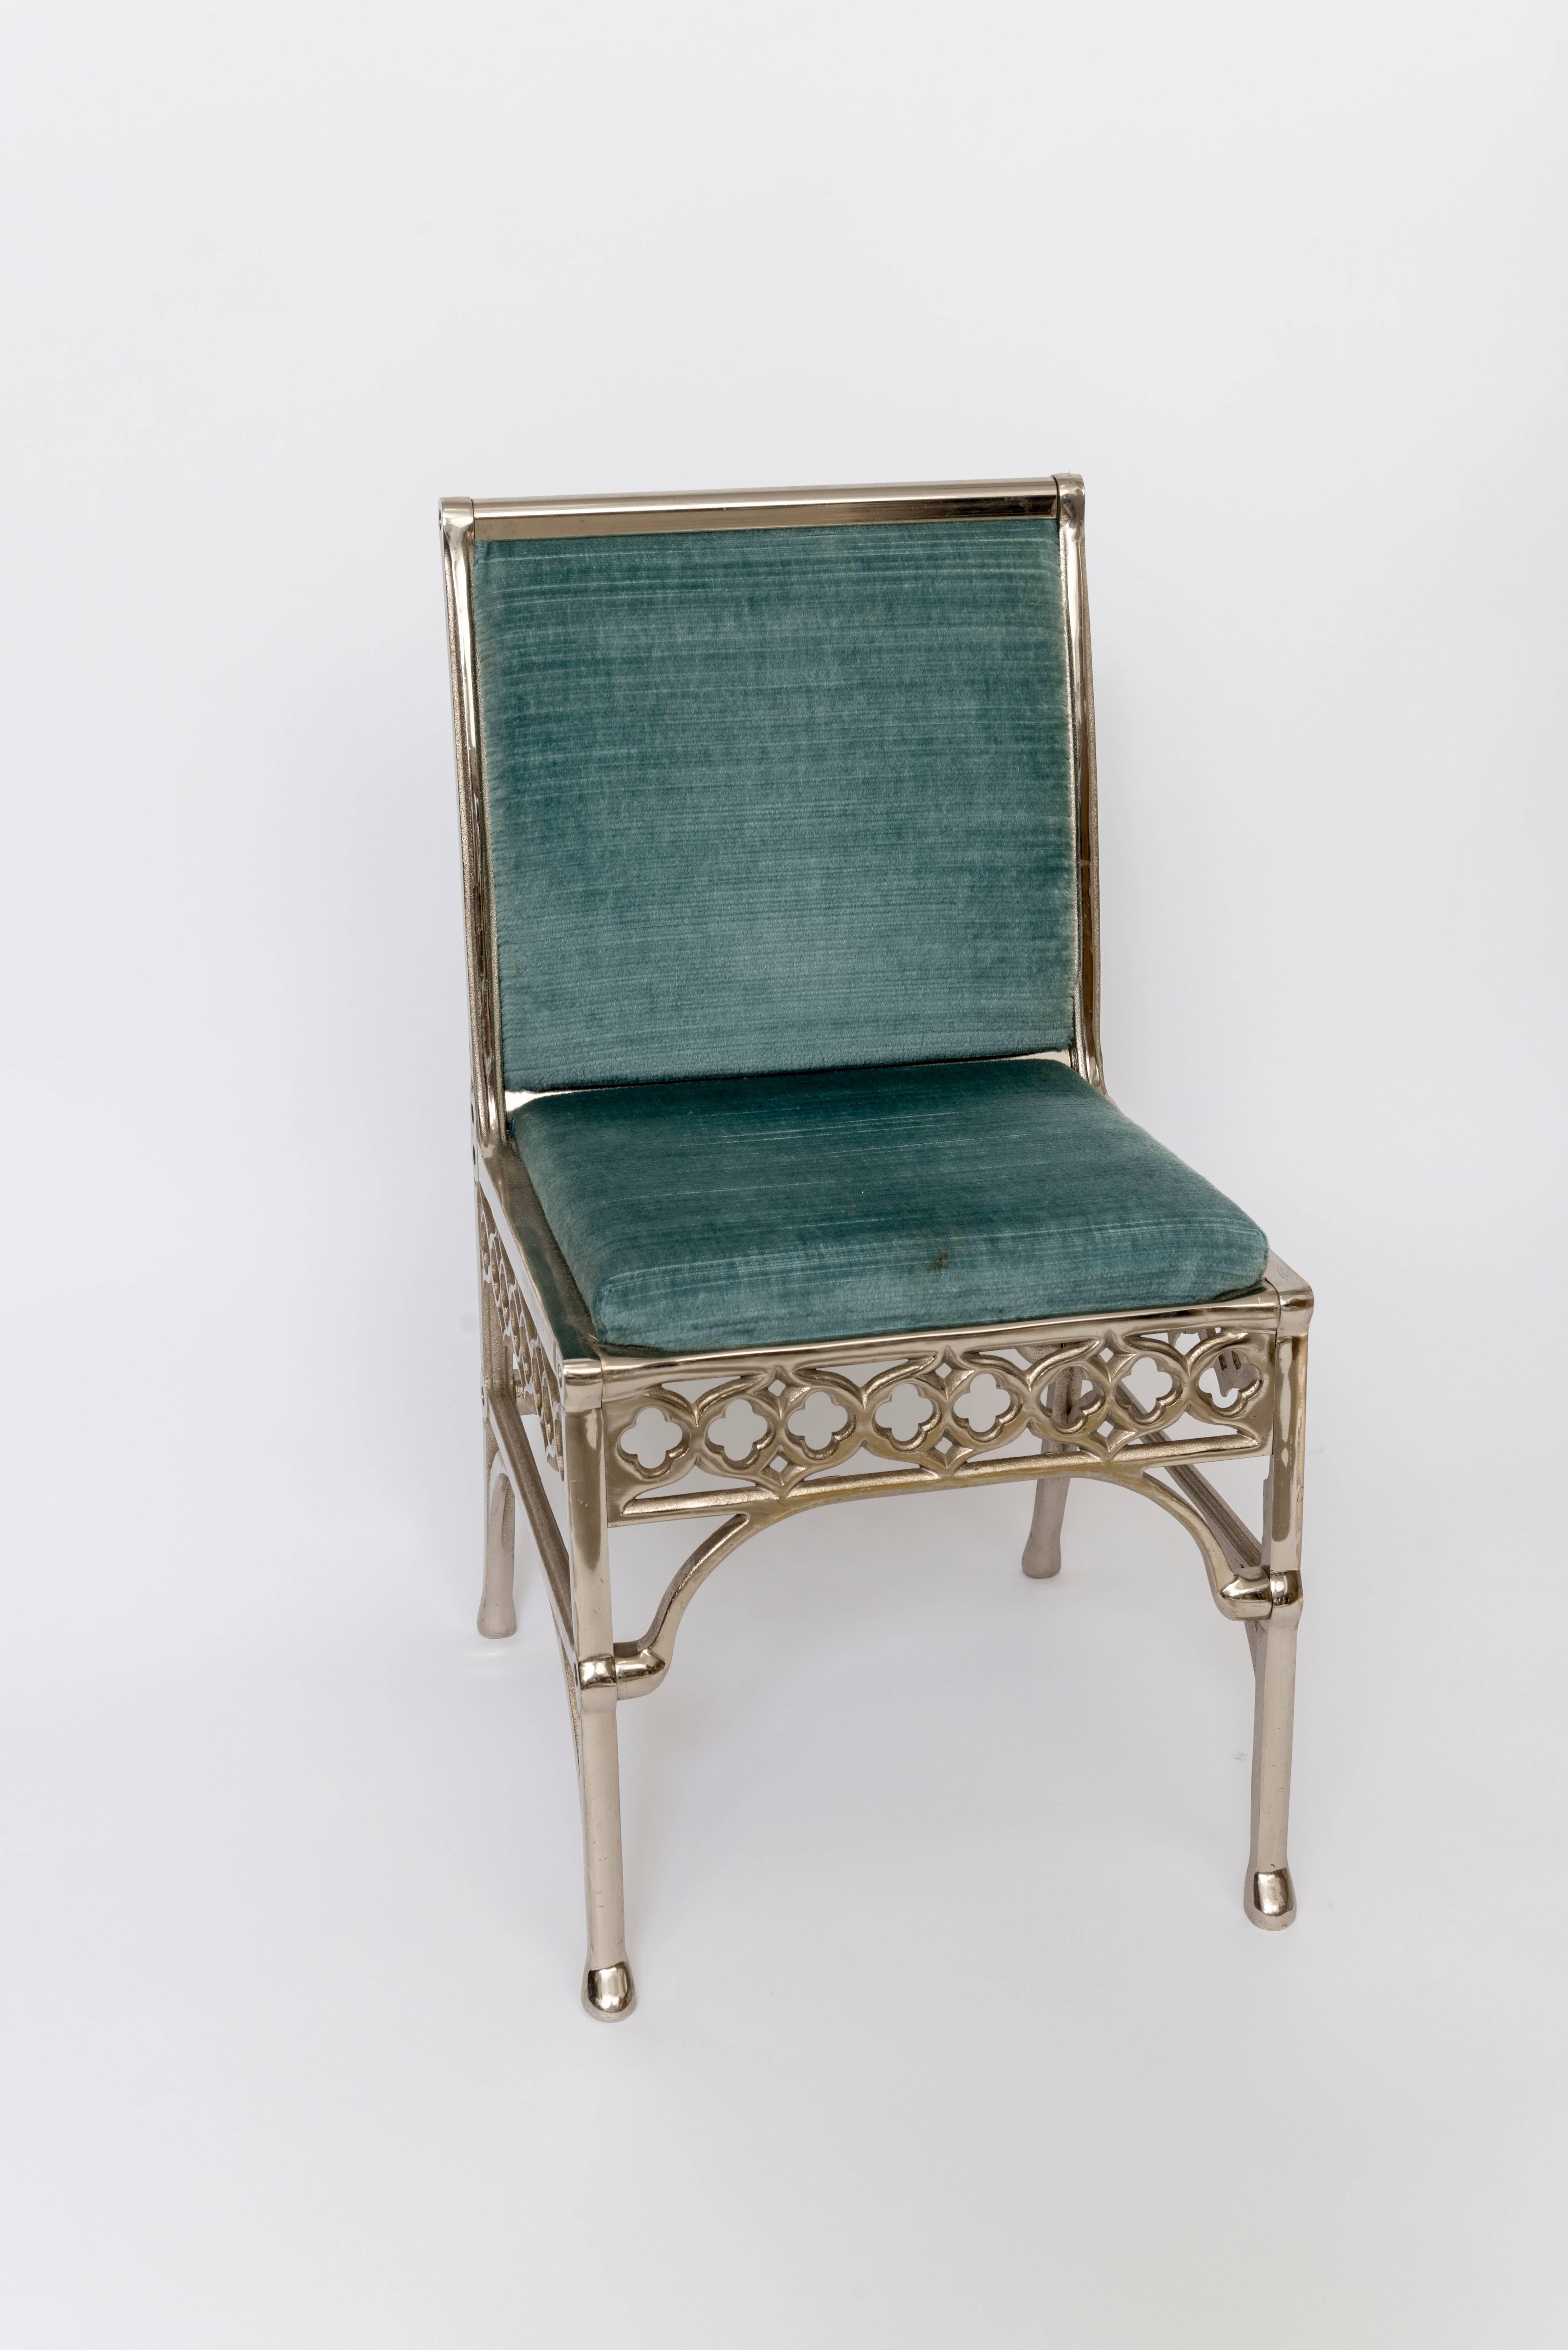 A unique set of eight [8] Neo-Gothic dining room chairs that reflect a Hollywood Regency feel as well. Upholstered in a teal blue shade of velvet in excellent condition. These chairs are quite solid and beautifully designed. Table shown with marble